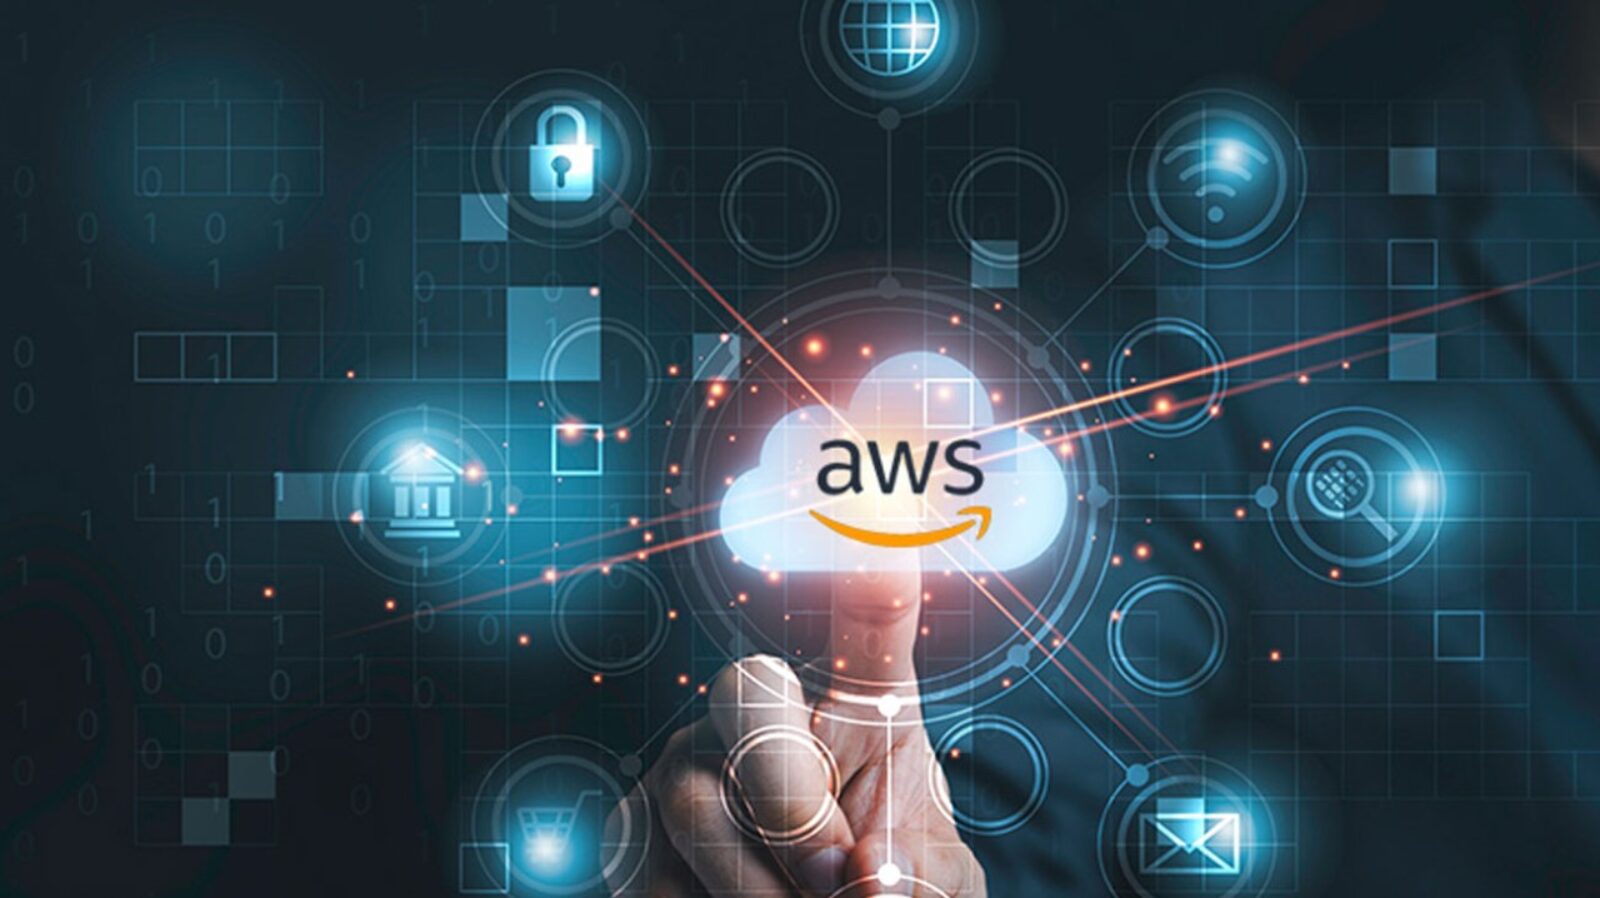 There are a number of companies that find AWS Cloud Hosting to be a compelling option